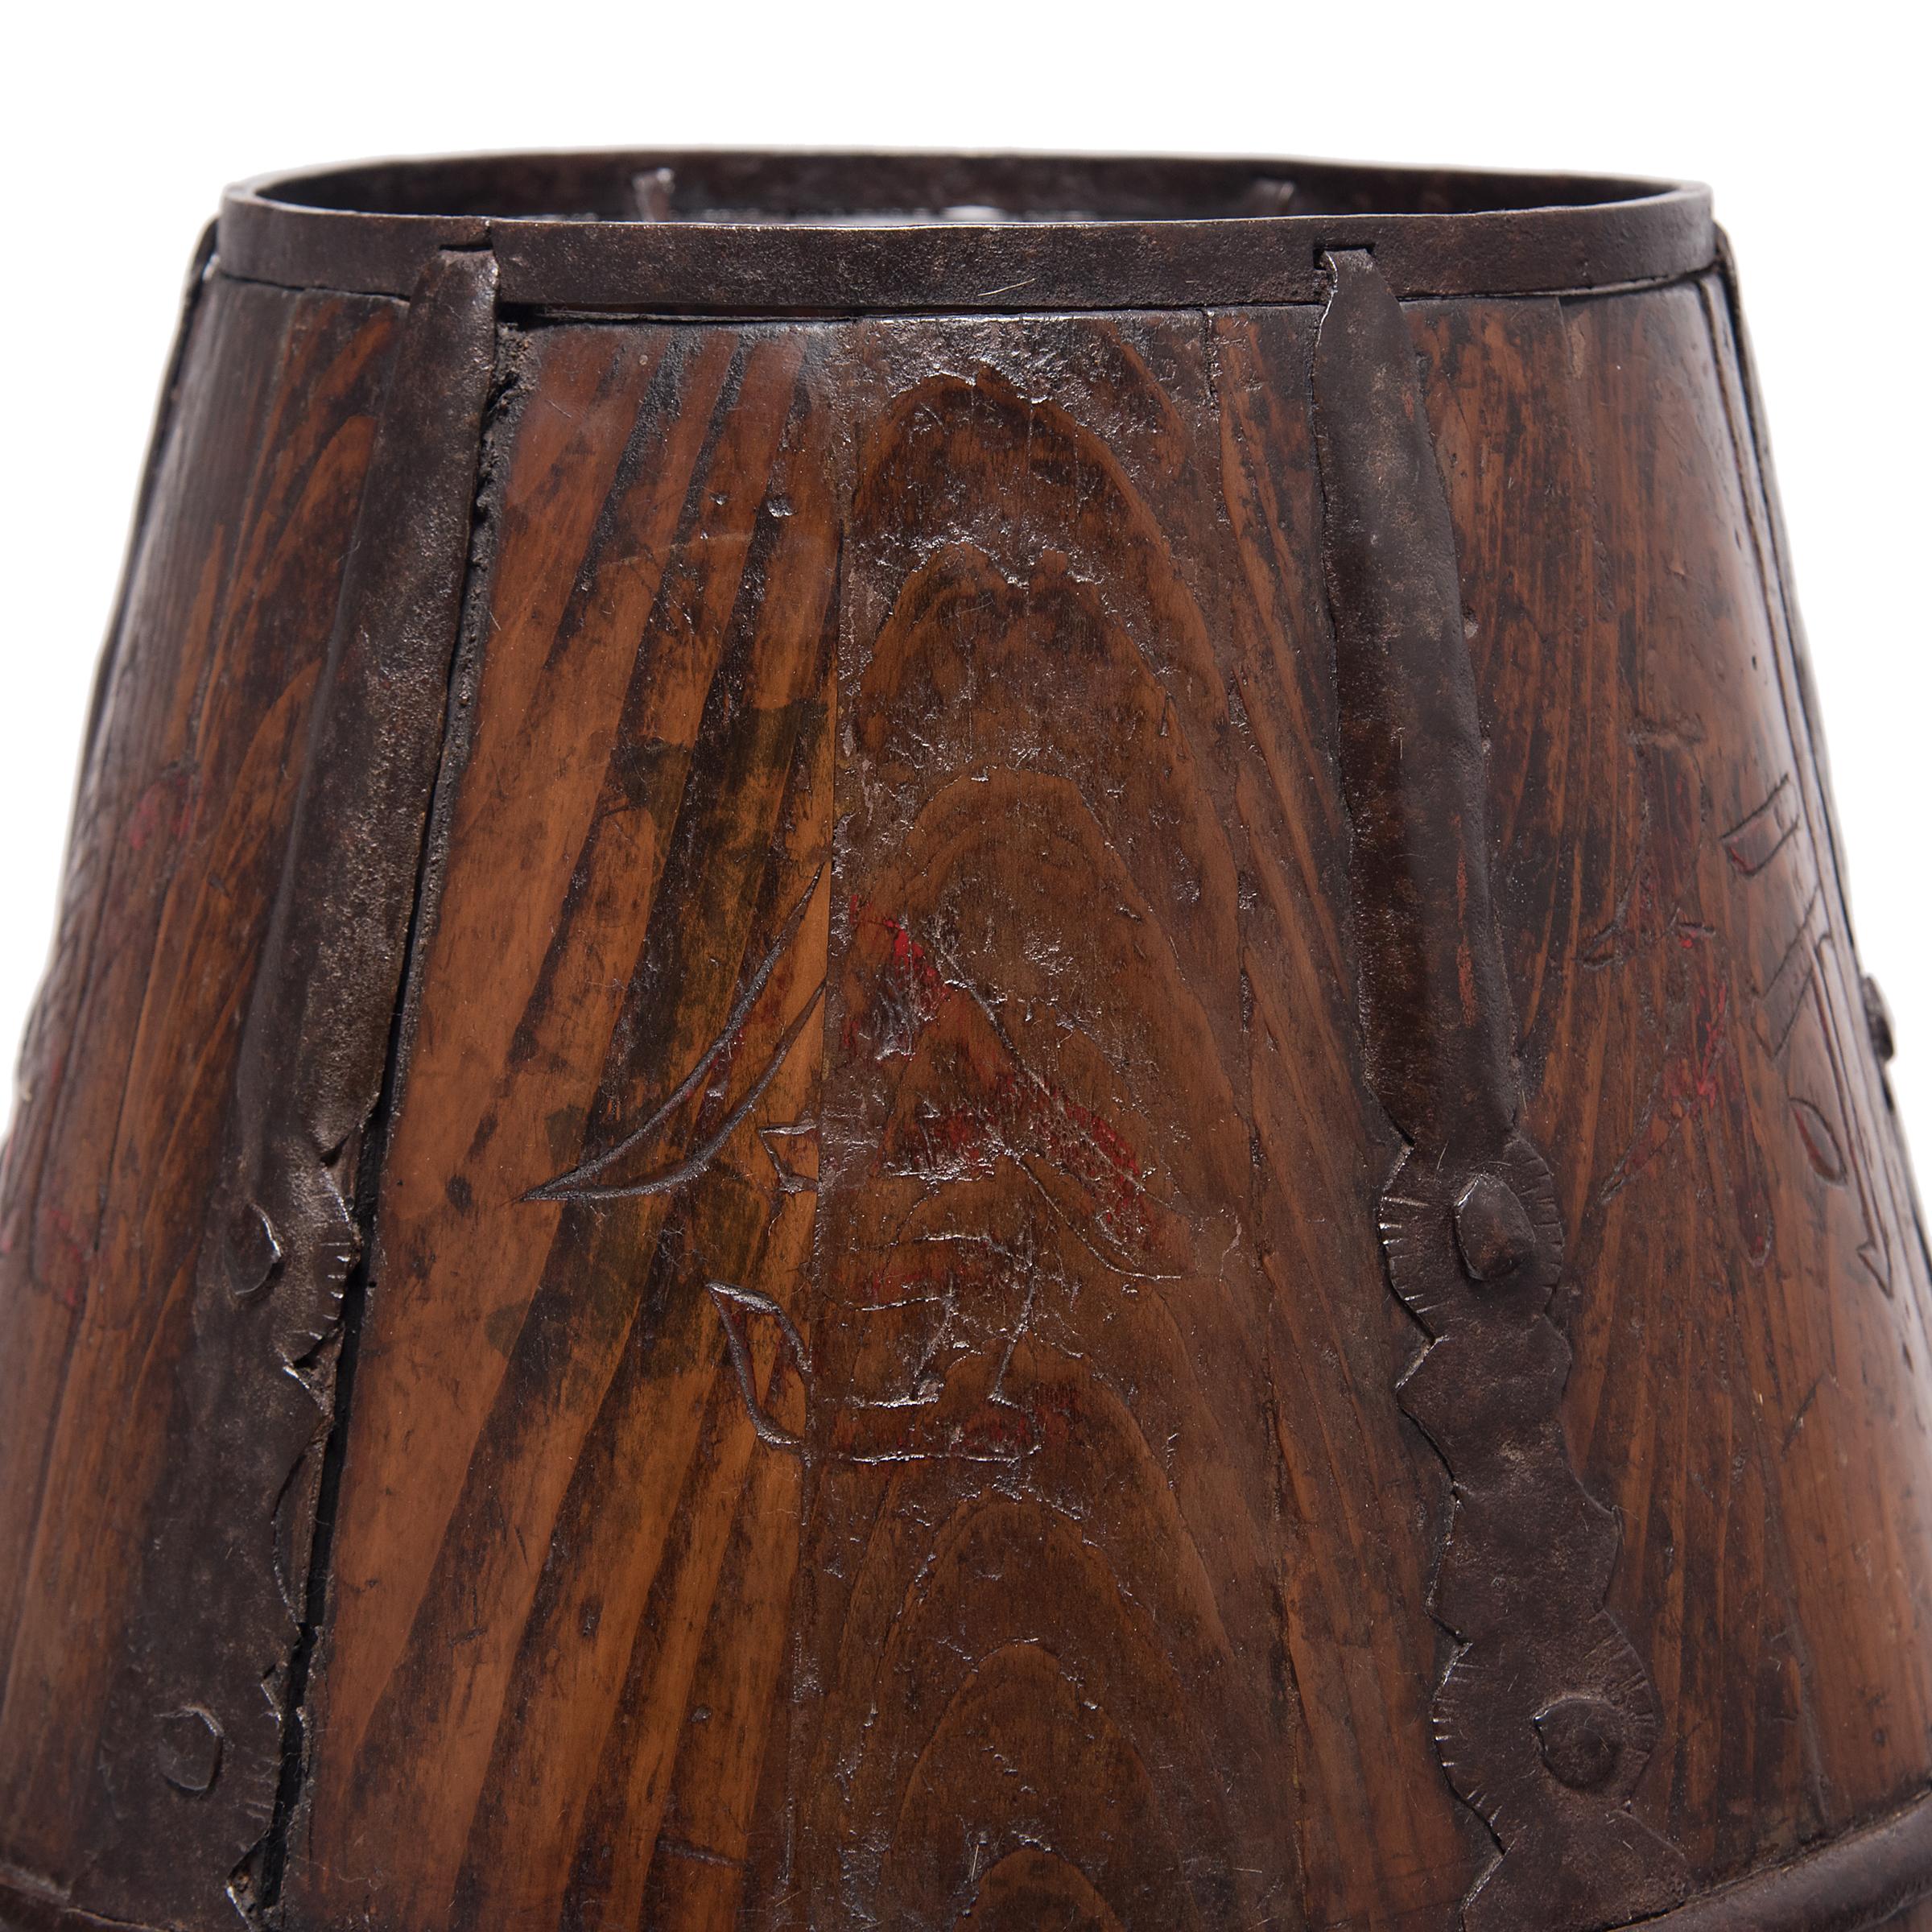 Pine Chinese Barrel-Form Grain Container, c. 1900